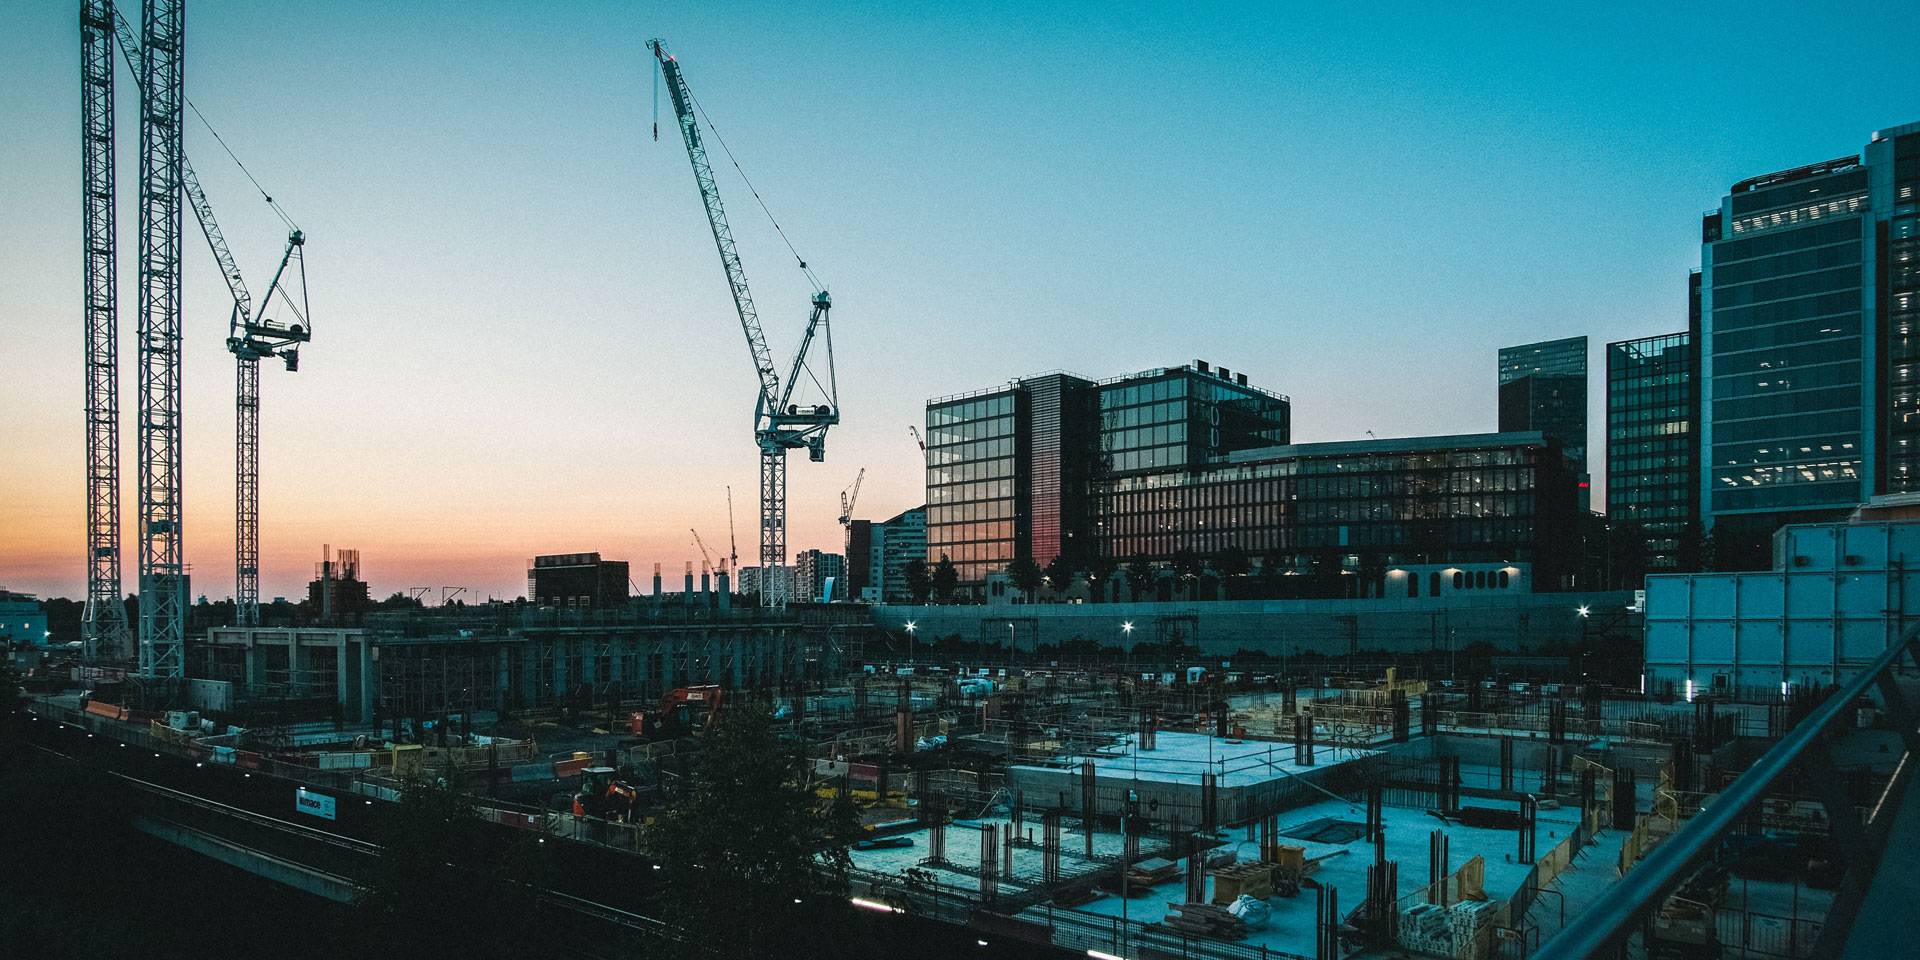 A construction site with cranes and buildings in the background.